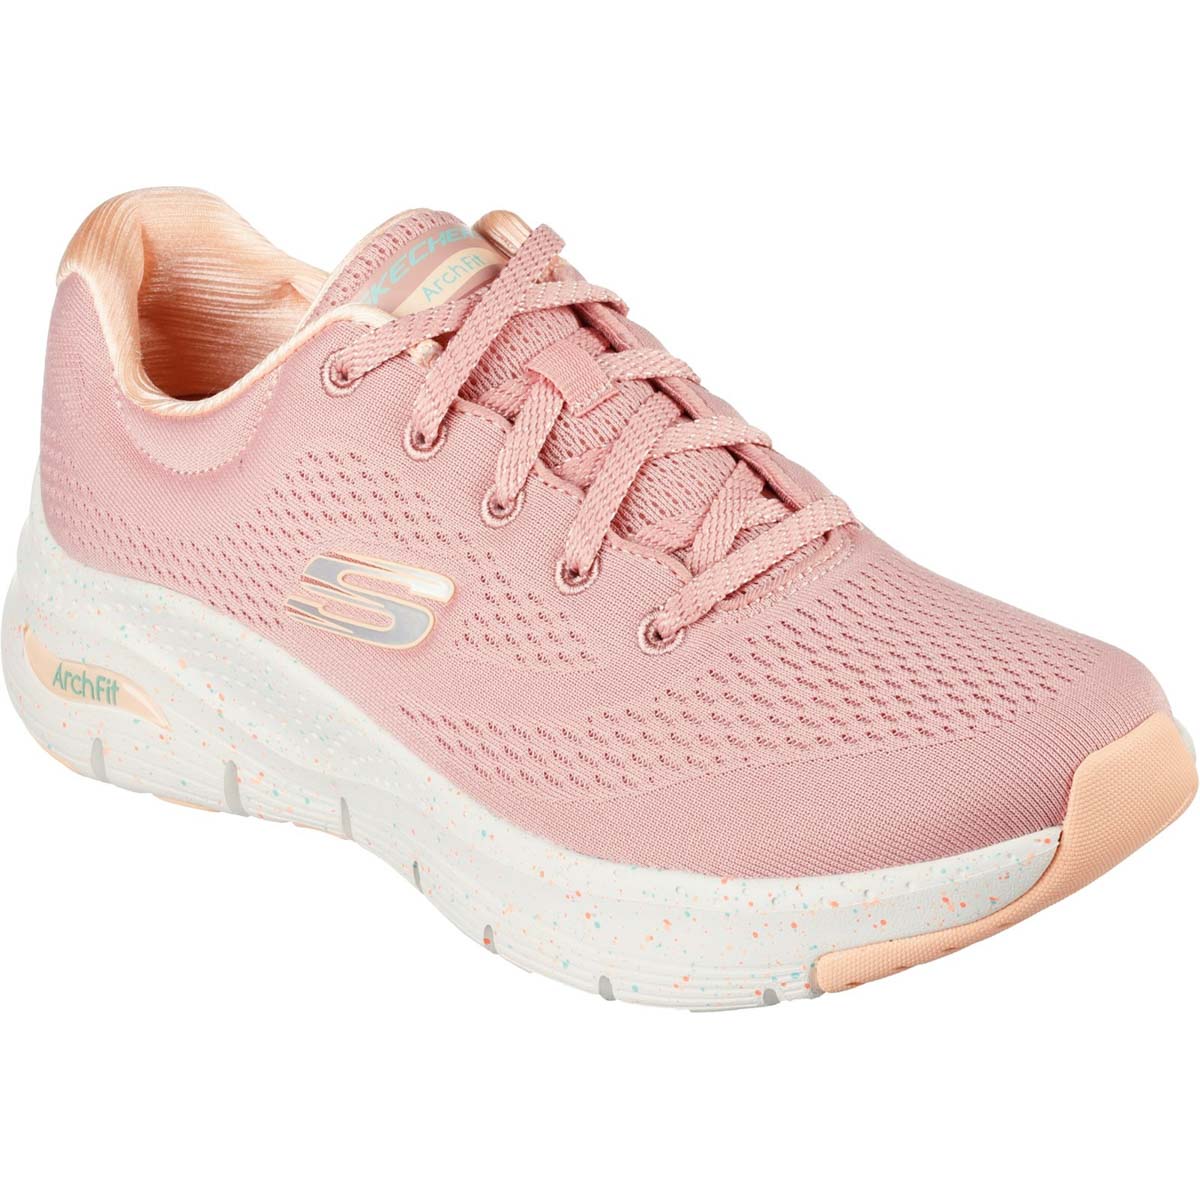 Skechers Arch Fit Freckle Me Pink Womens Trainers 149566 In Size 4 In Plain Pink